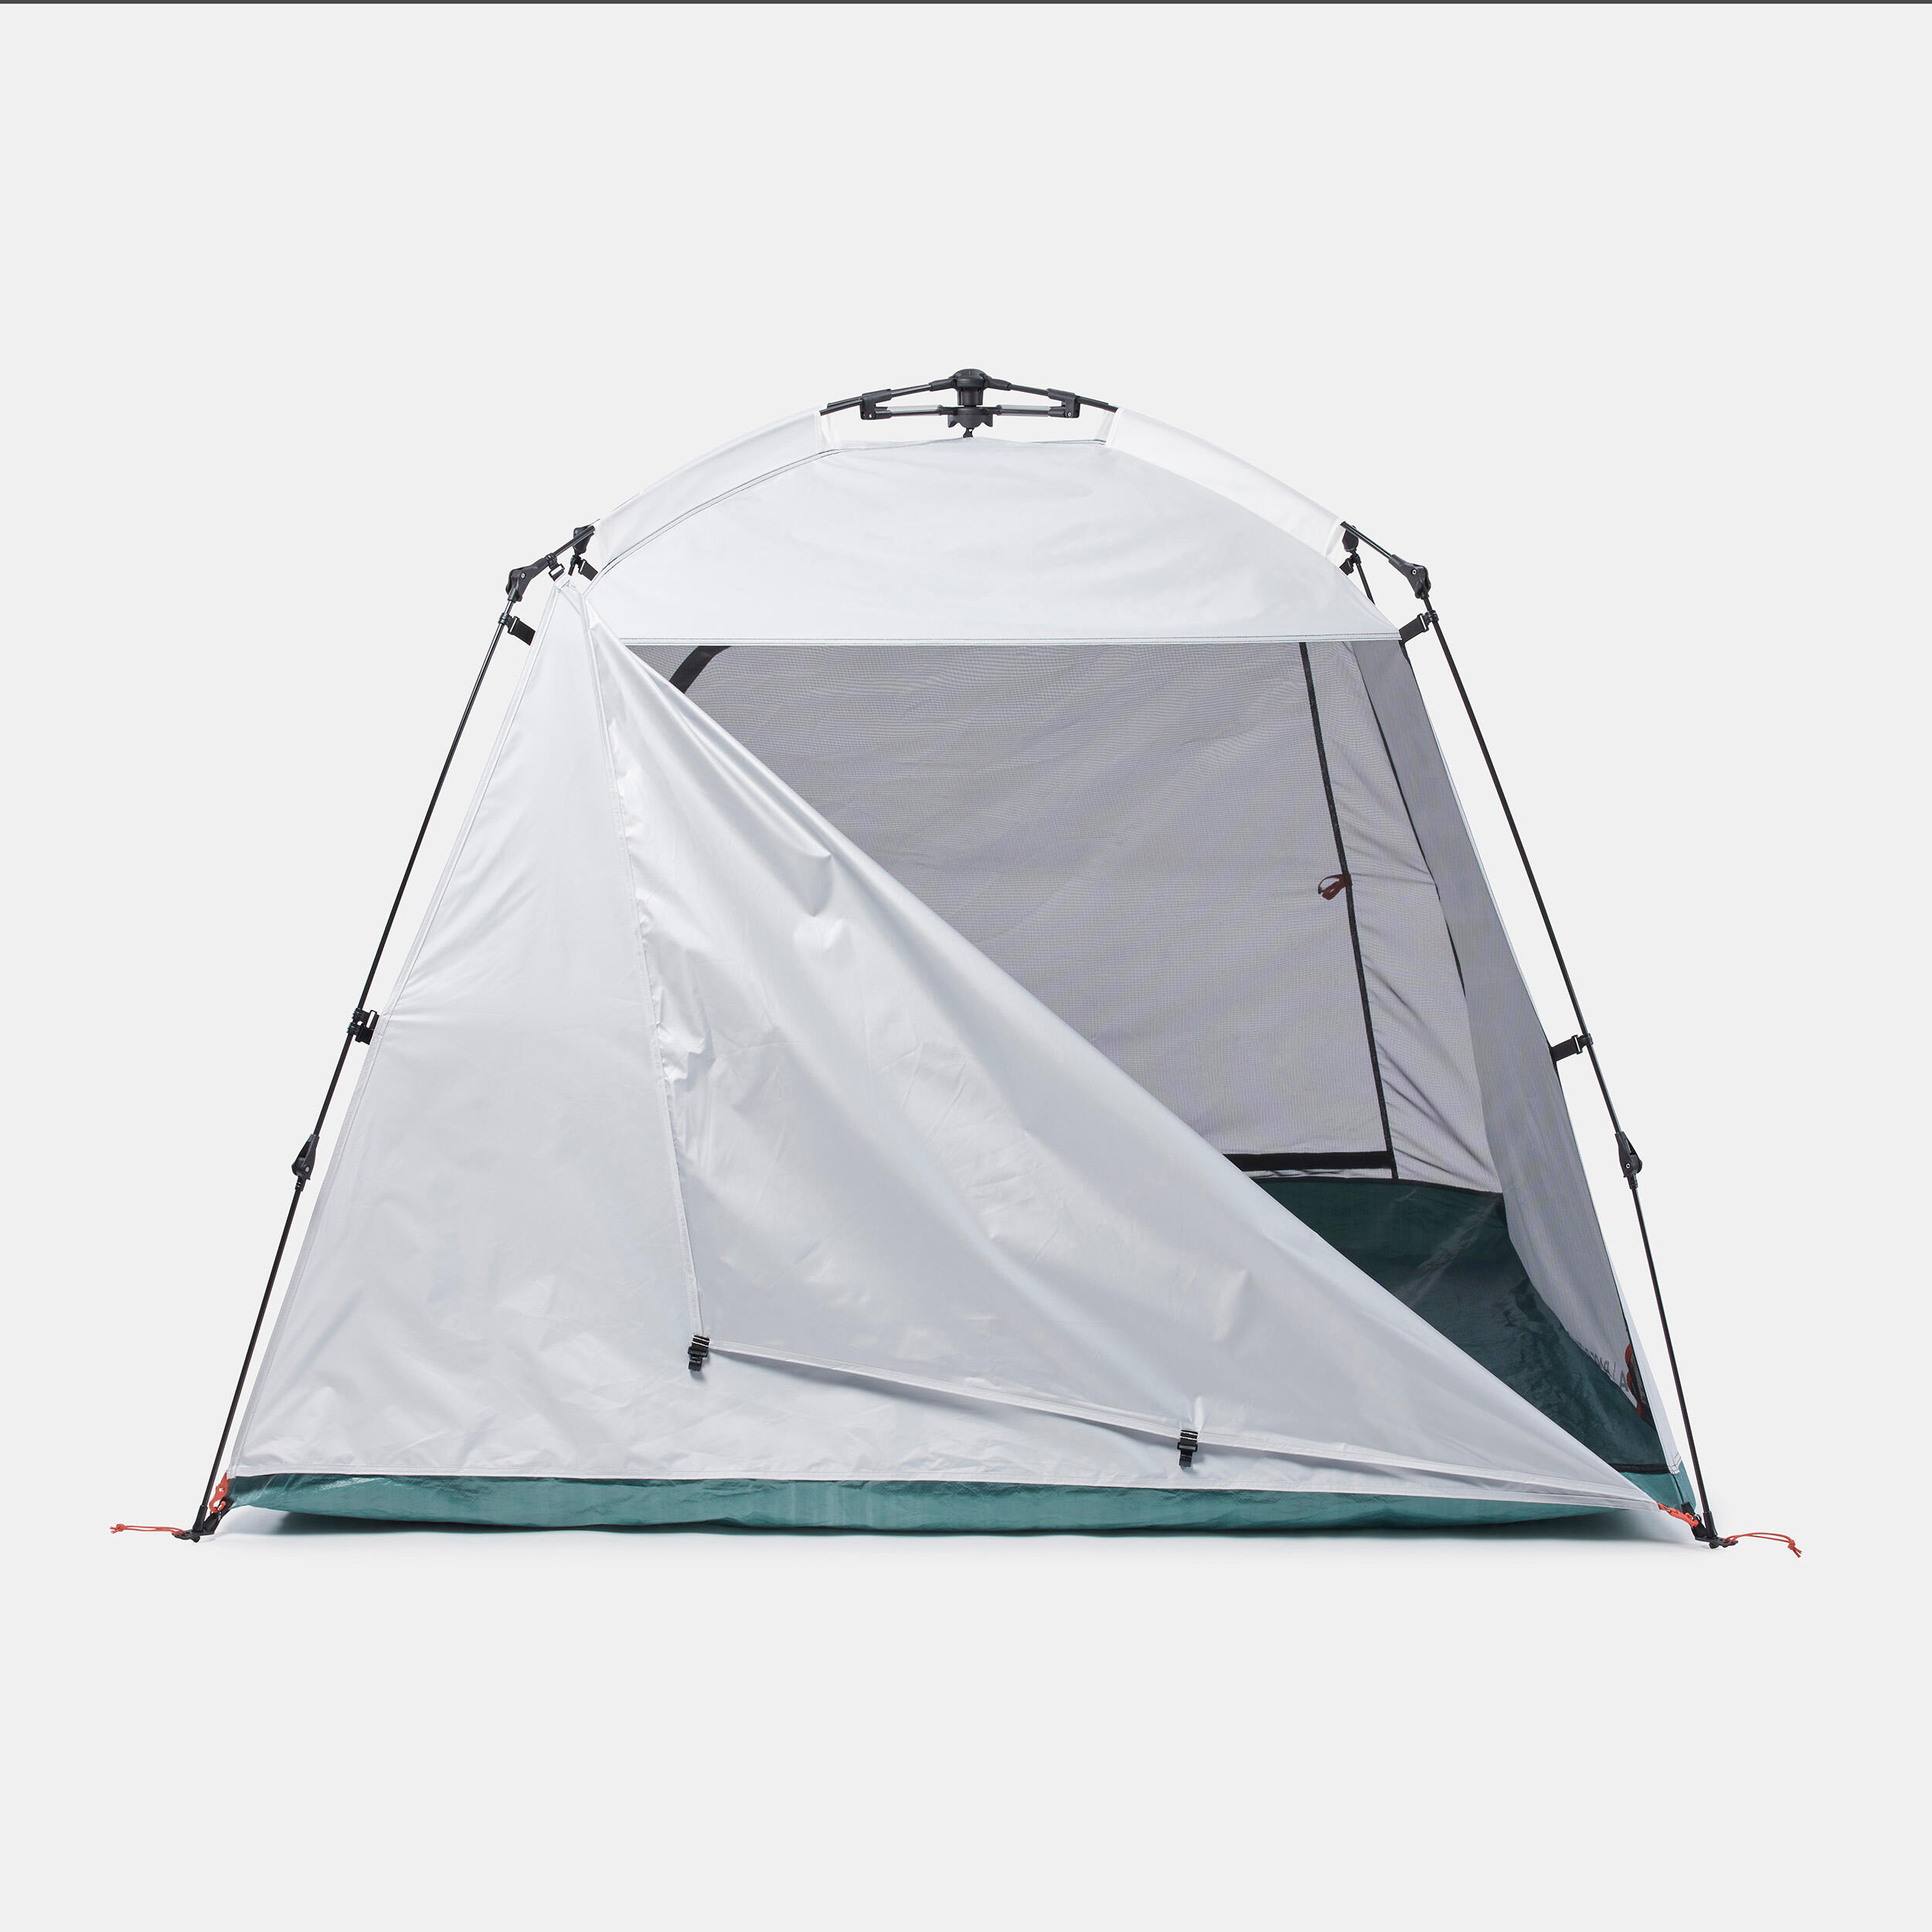 LFF MASSAGE Instant Family Camping Tent For 4-6 Persons, Waterproof Sun  Shelter With Storage Bag, Quick Set Up For Camping, Hiking,B,2102101  エマージェンシーグッズ